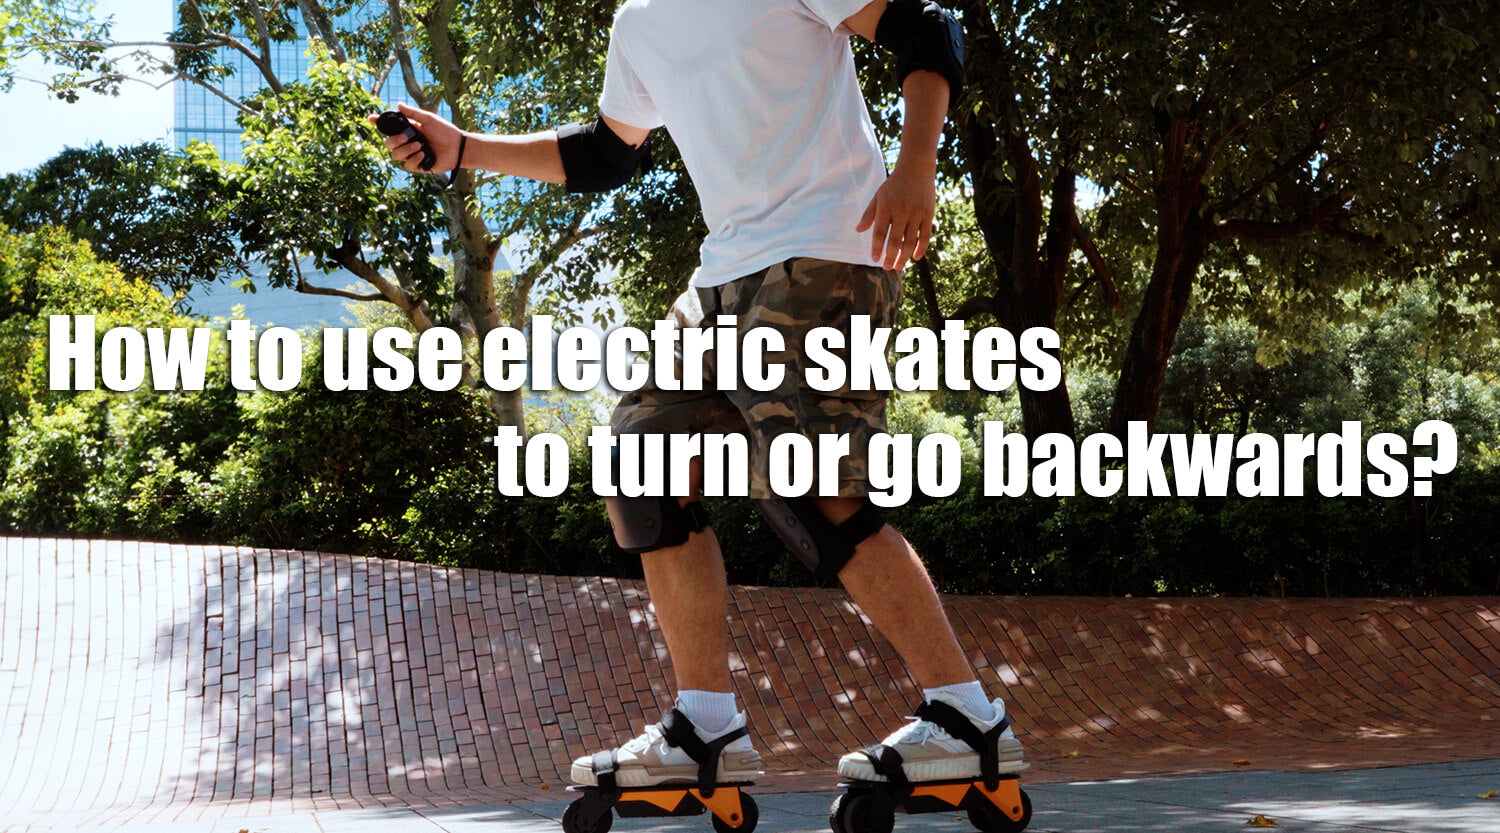 How do you make turns on electric skates And how do you skate in reverse